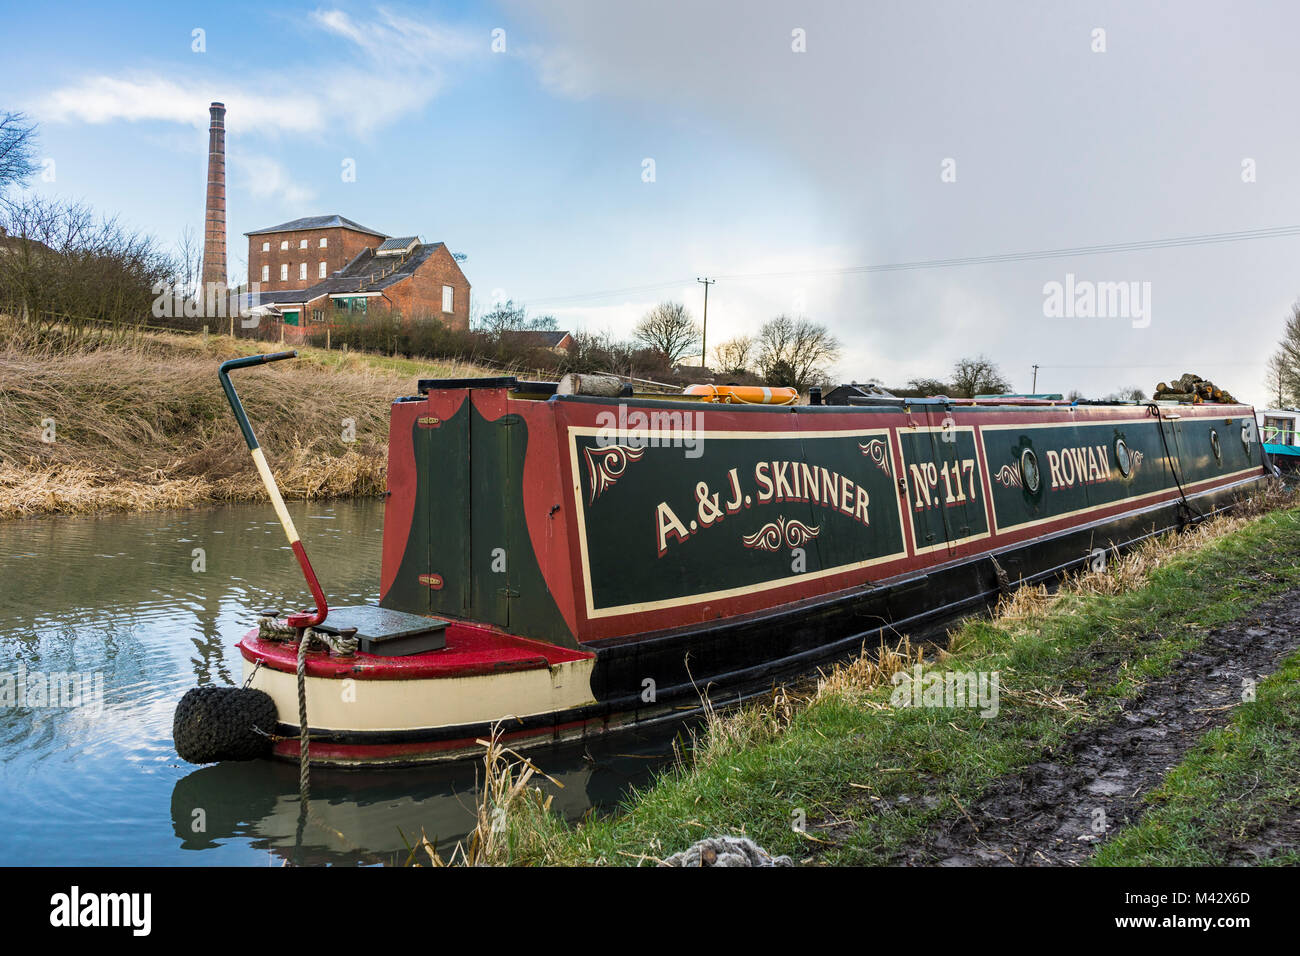 Narrowboat on the Kennet and Avon Canal with the Crofton Pumping Station (Crofton Beam Engines) in the background, Wiltshire, England, UK Stock Photo